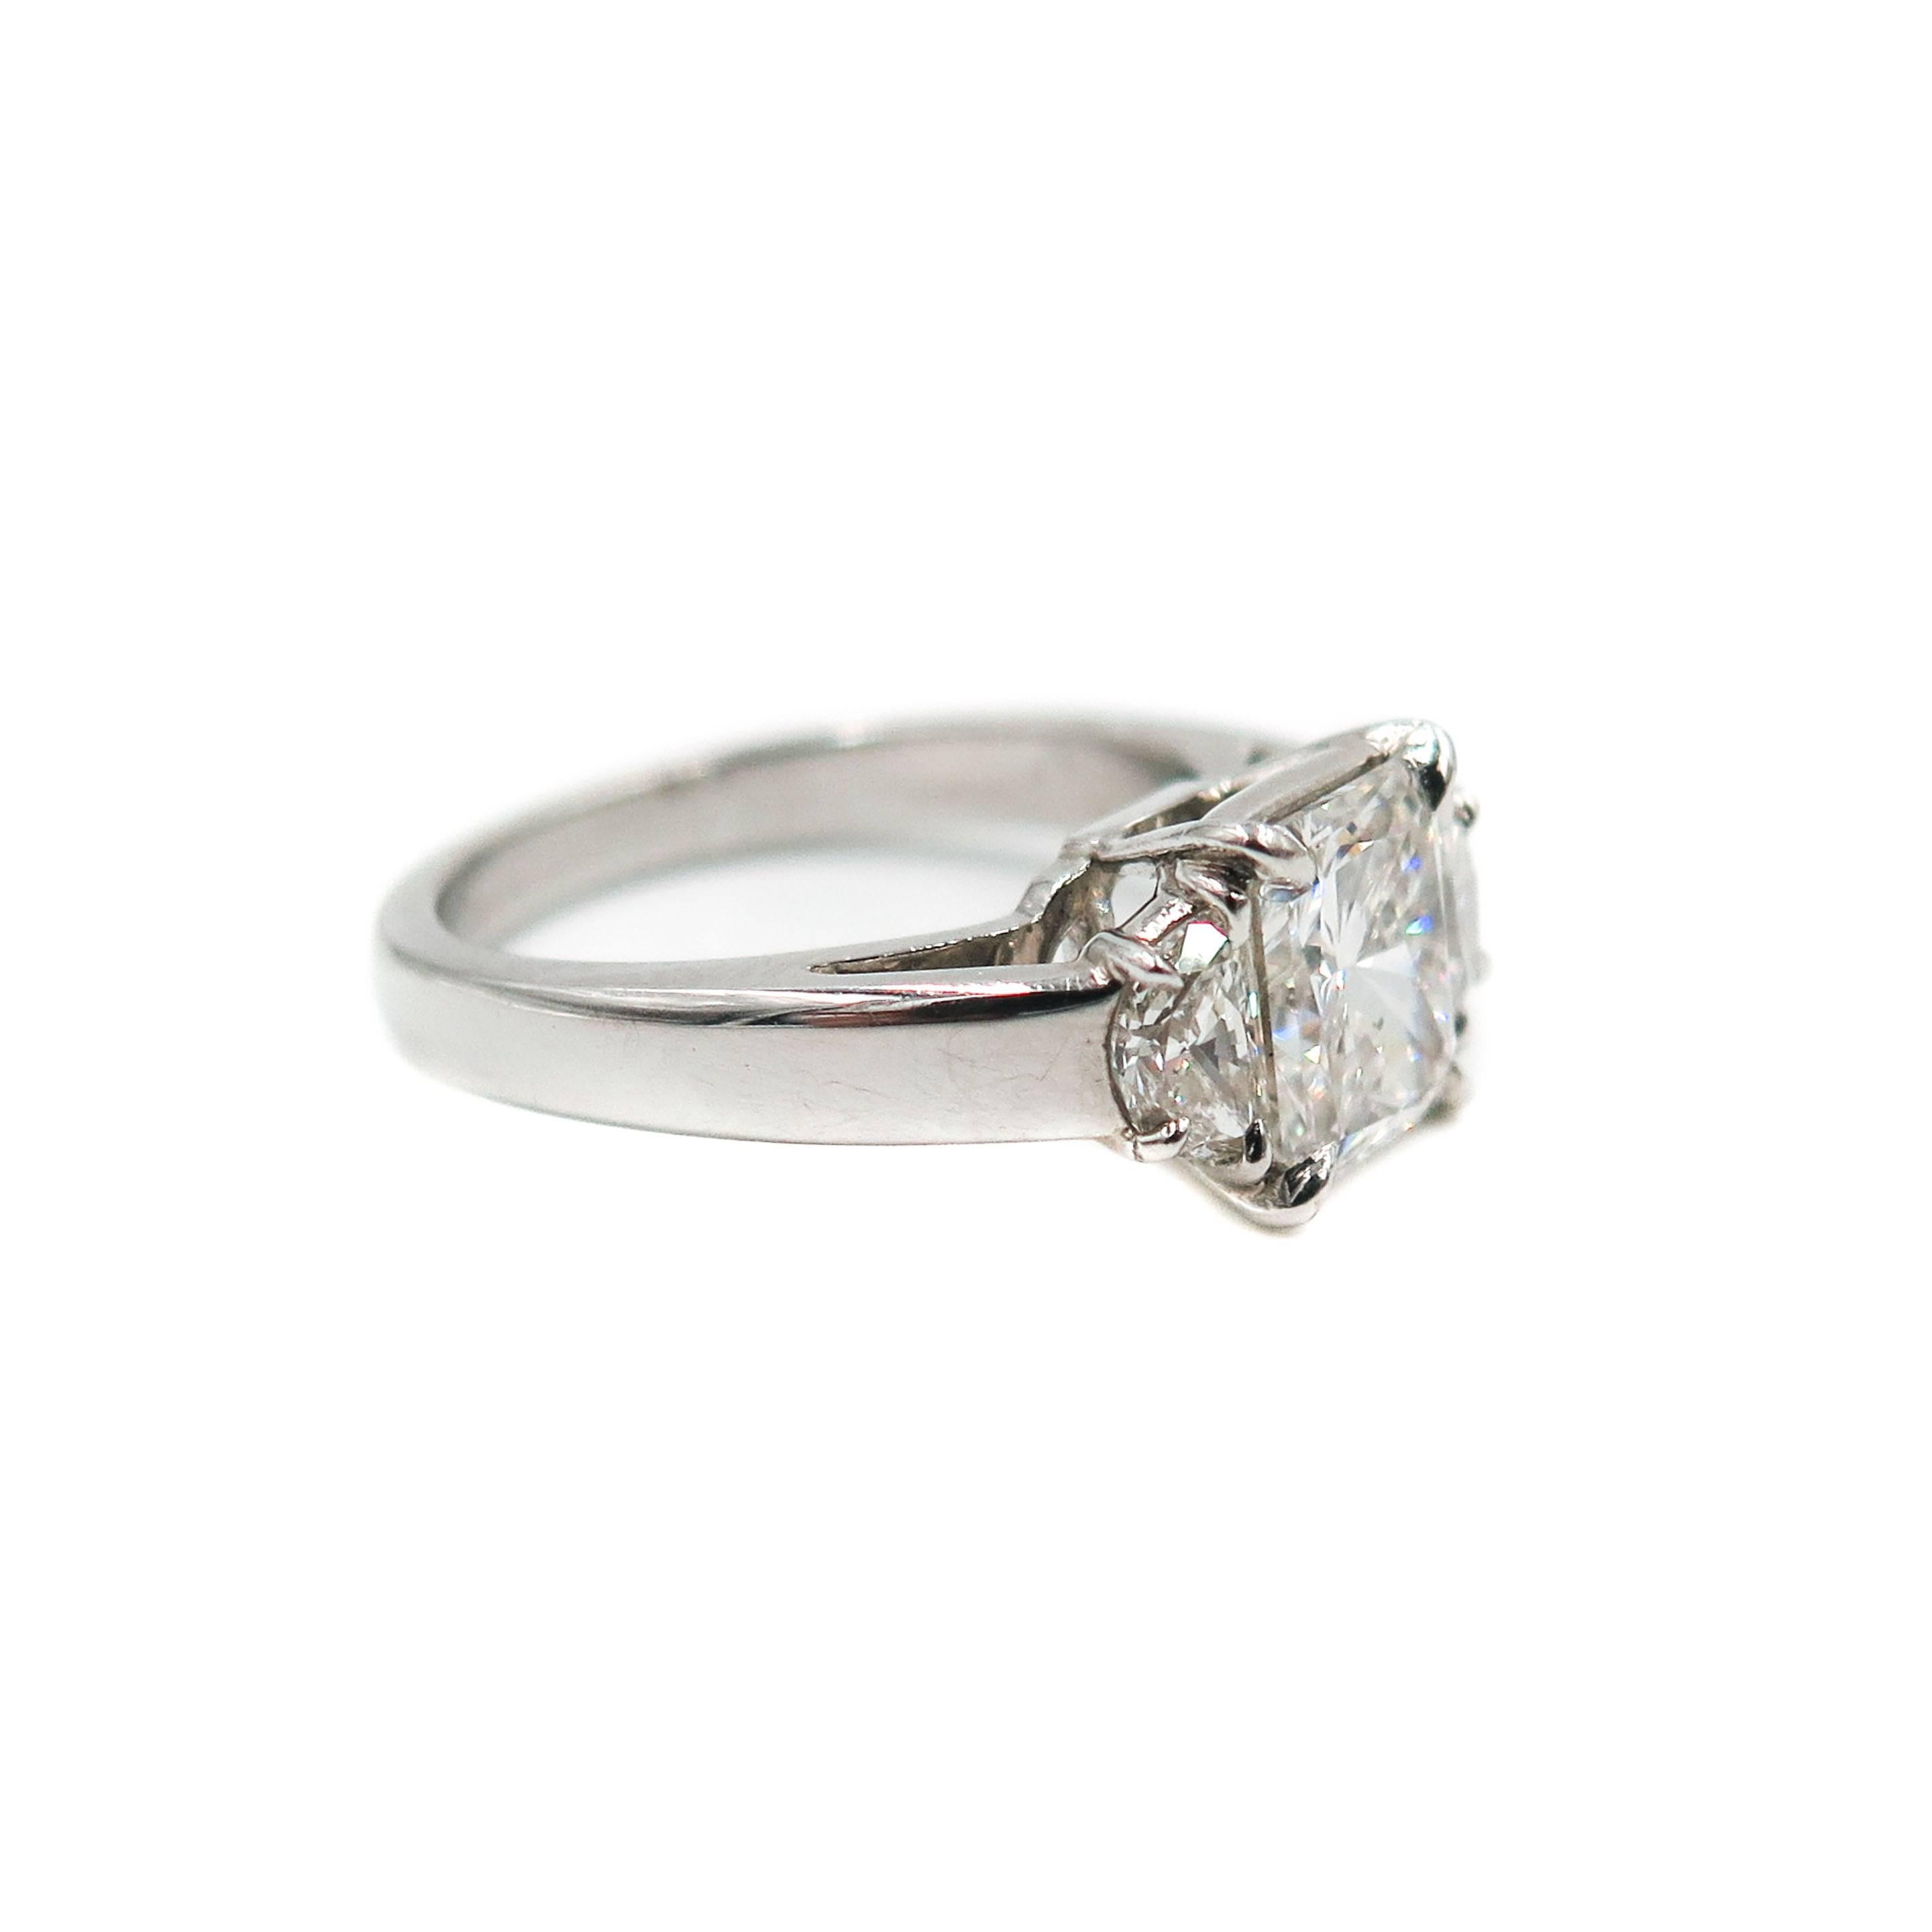 We have been working tirelessly over the years designing Diamond Engagement Rings and recreating those you've come to know and love. 
Handmade in our workshop this beautiful Diamond Engagement Ring features a GIA certified 2.00 carat Radiant cut